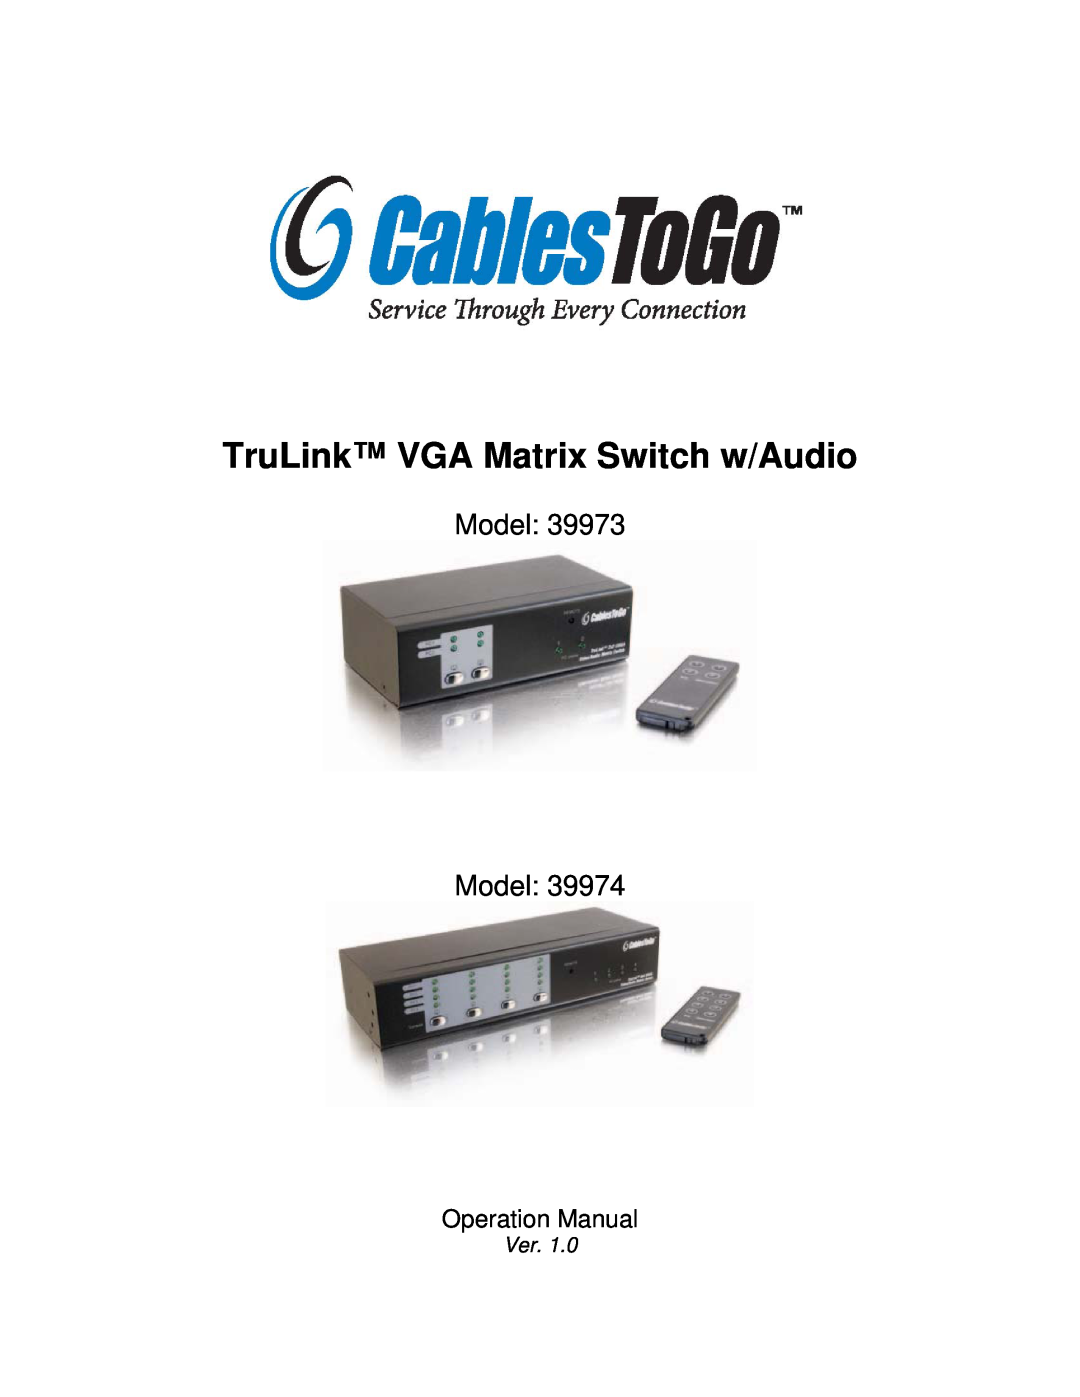 Cables to Go 39974, 39973 operation manual Model Model, TruLink VGA Matrix Switch w/Audio 